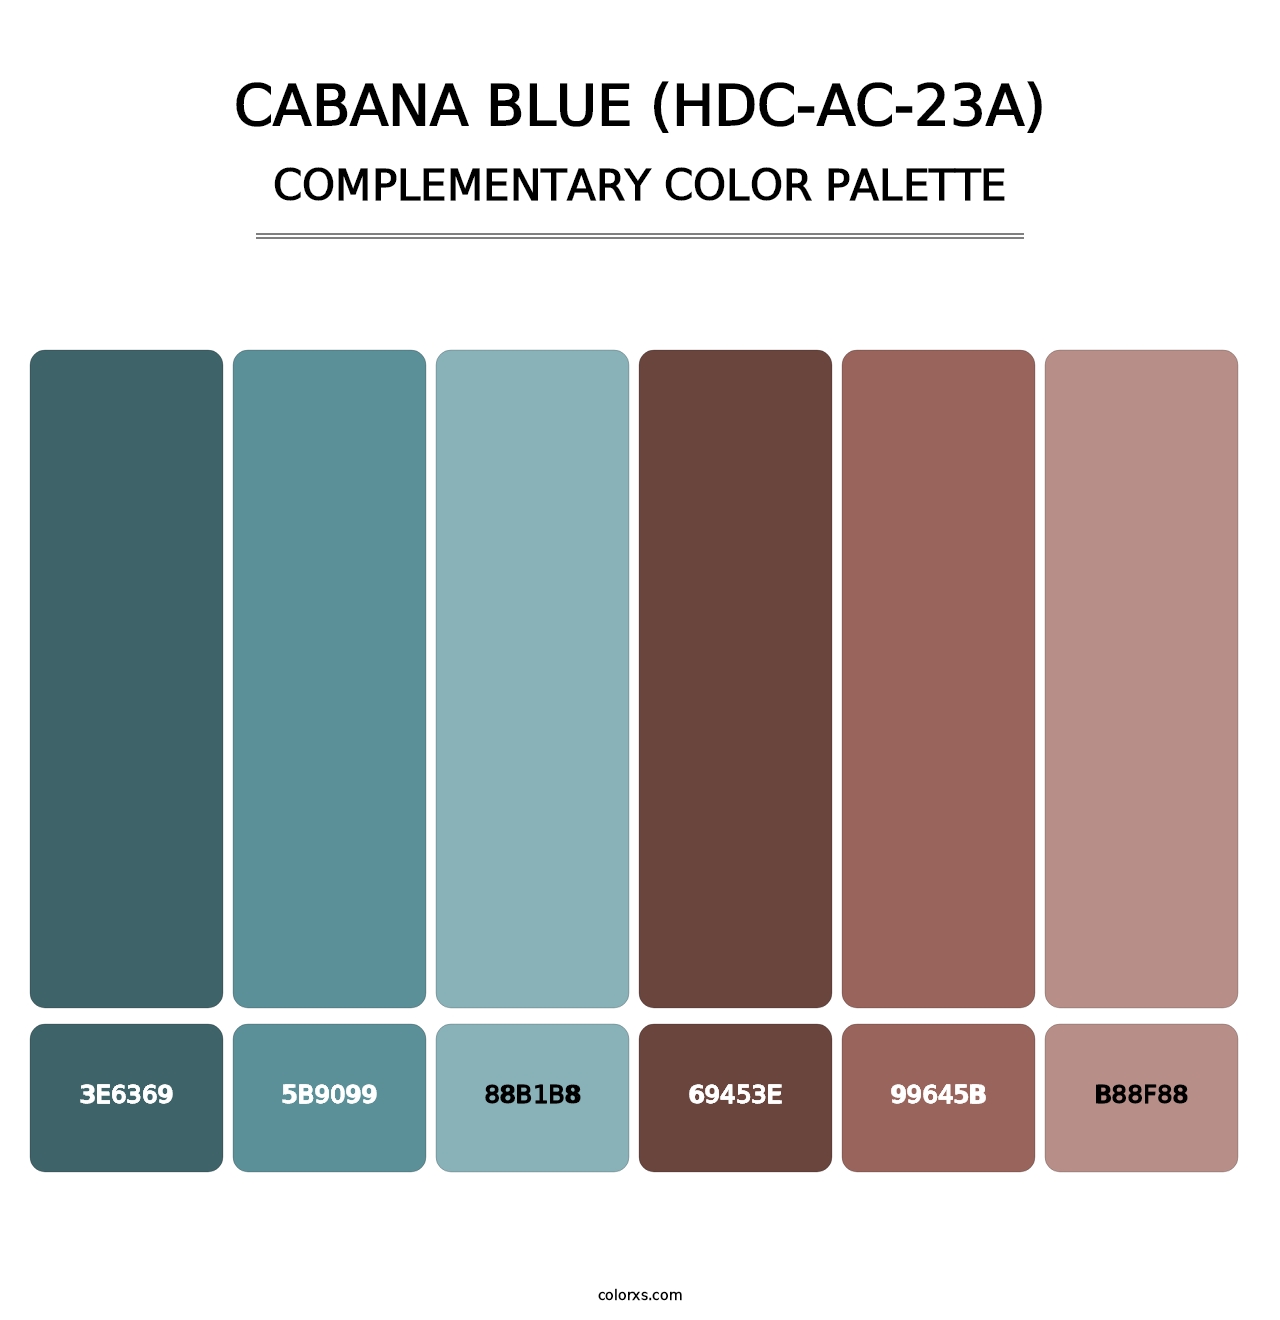 Cabana Blue (HDC-AC-23A) - Complementary Color Palette